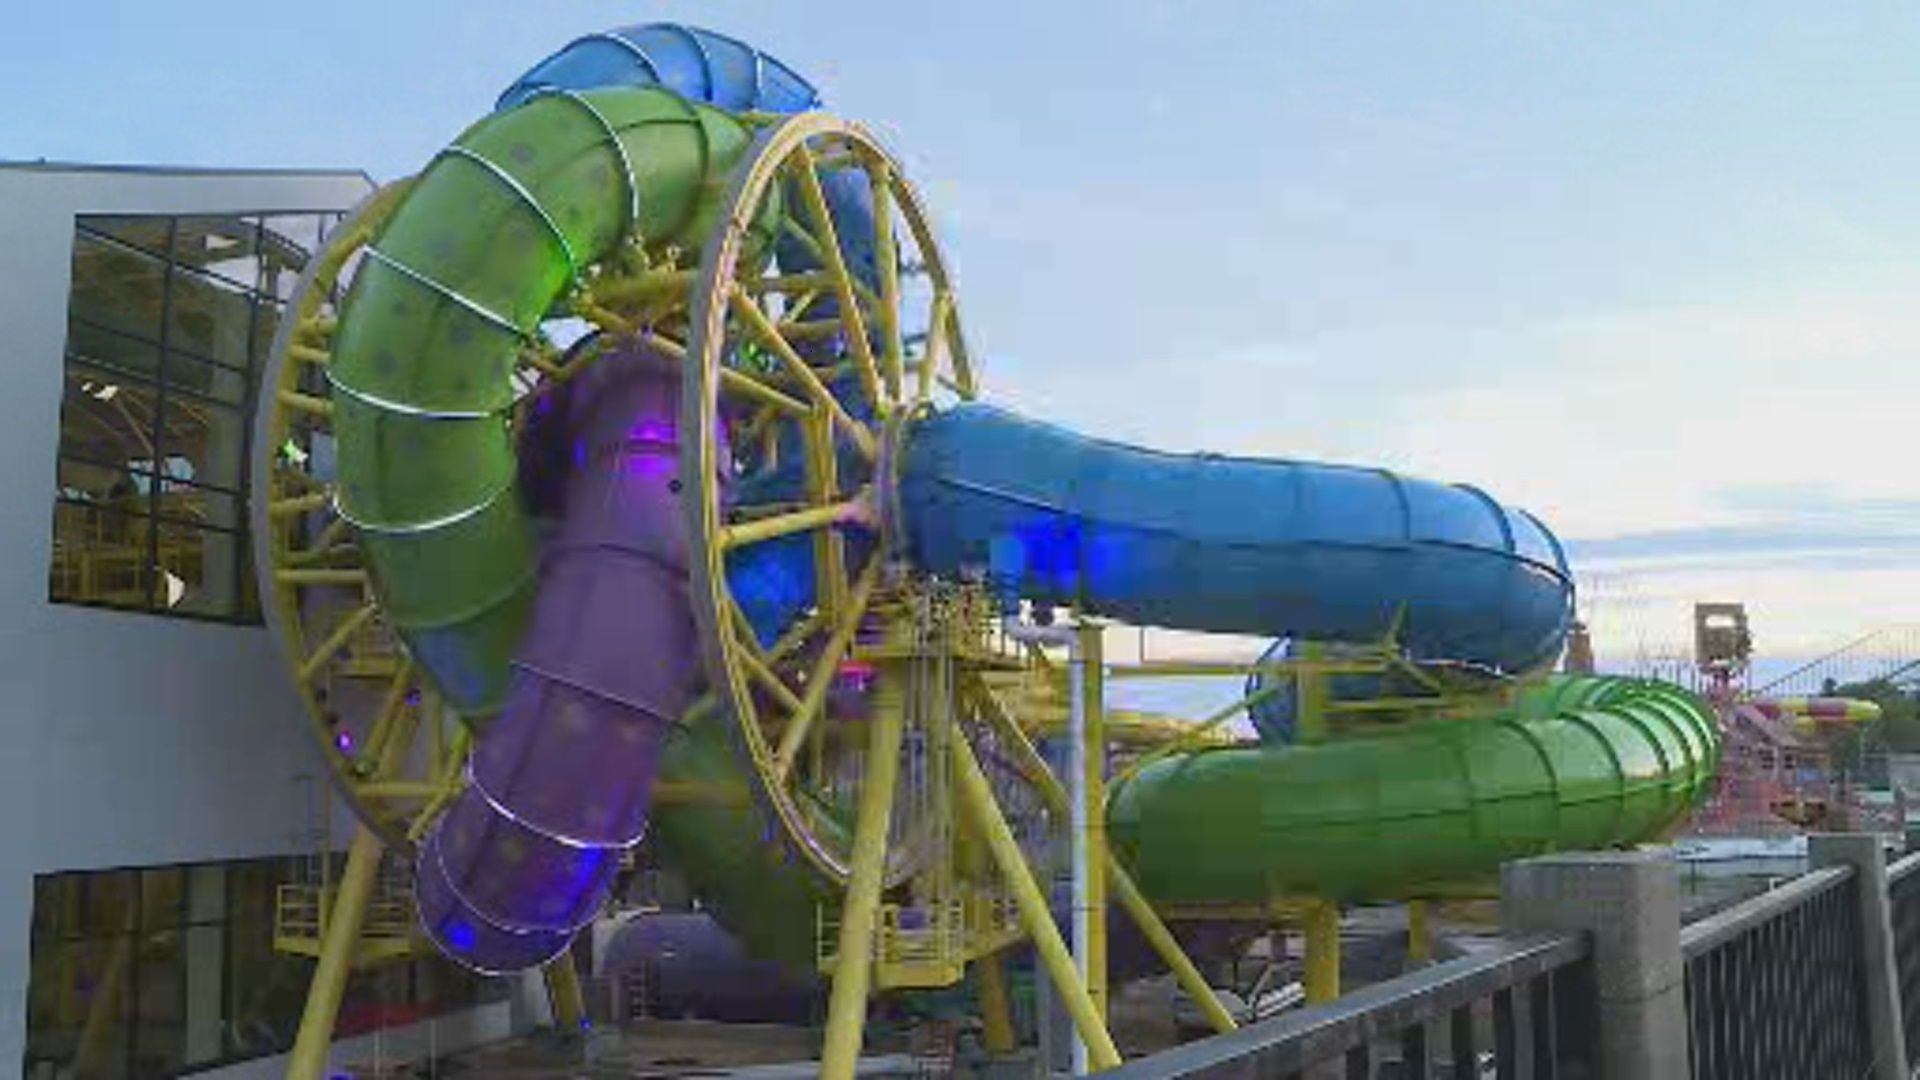 Wisconsin Dells waterparks unveil new rides for summer